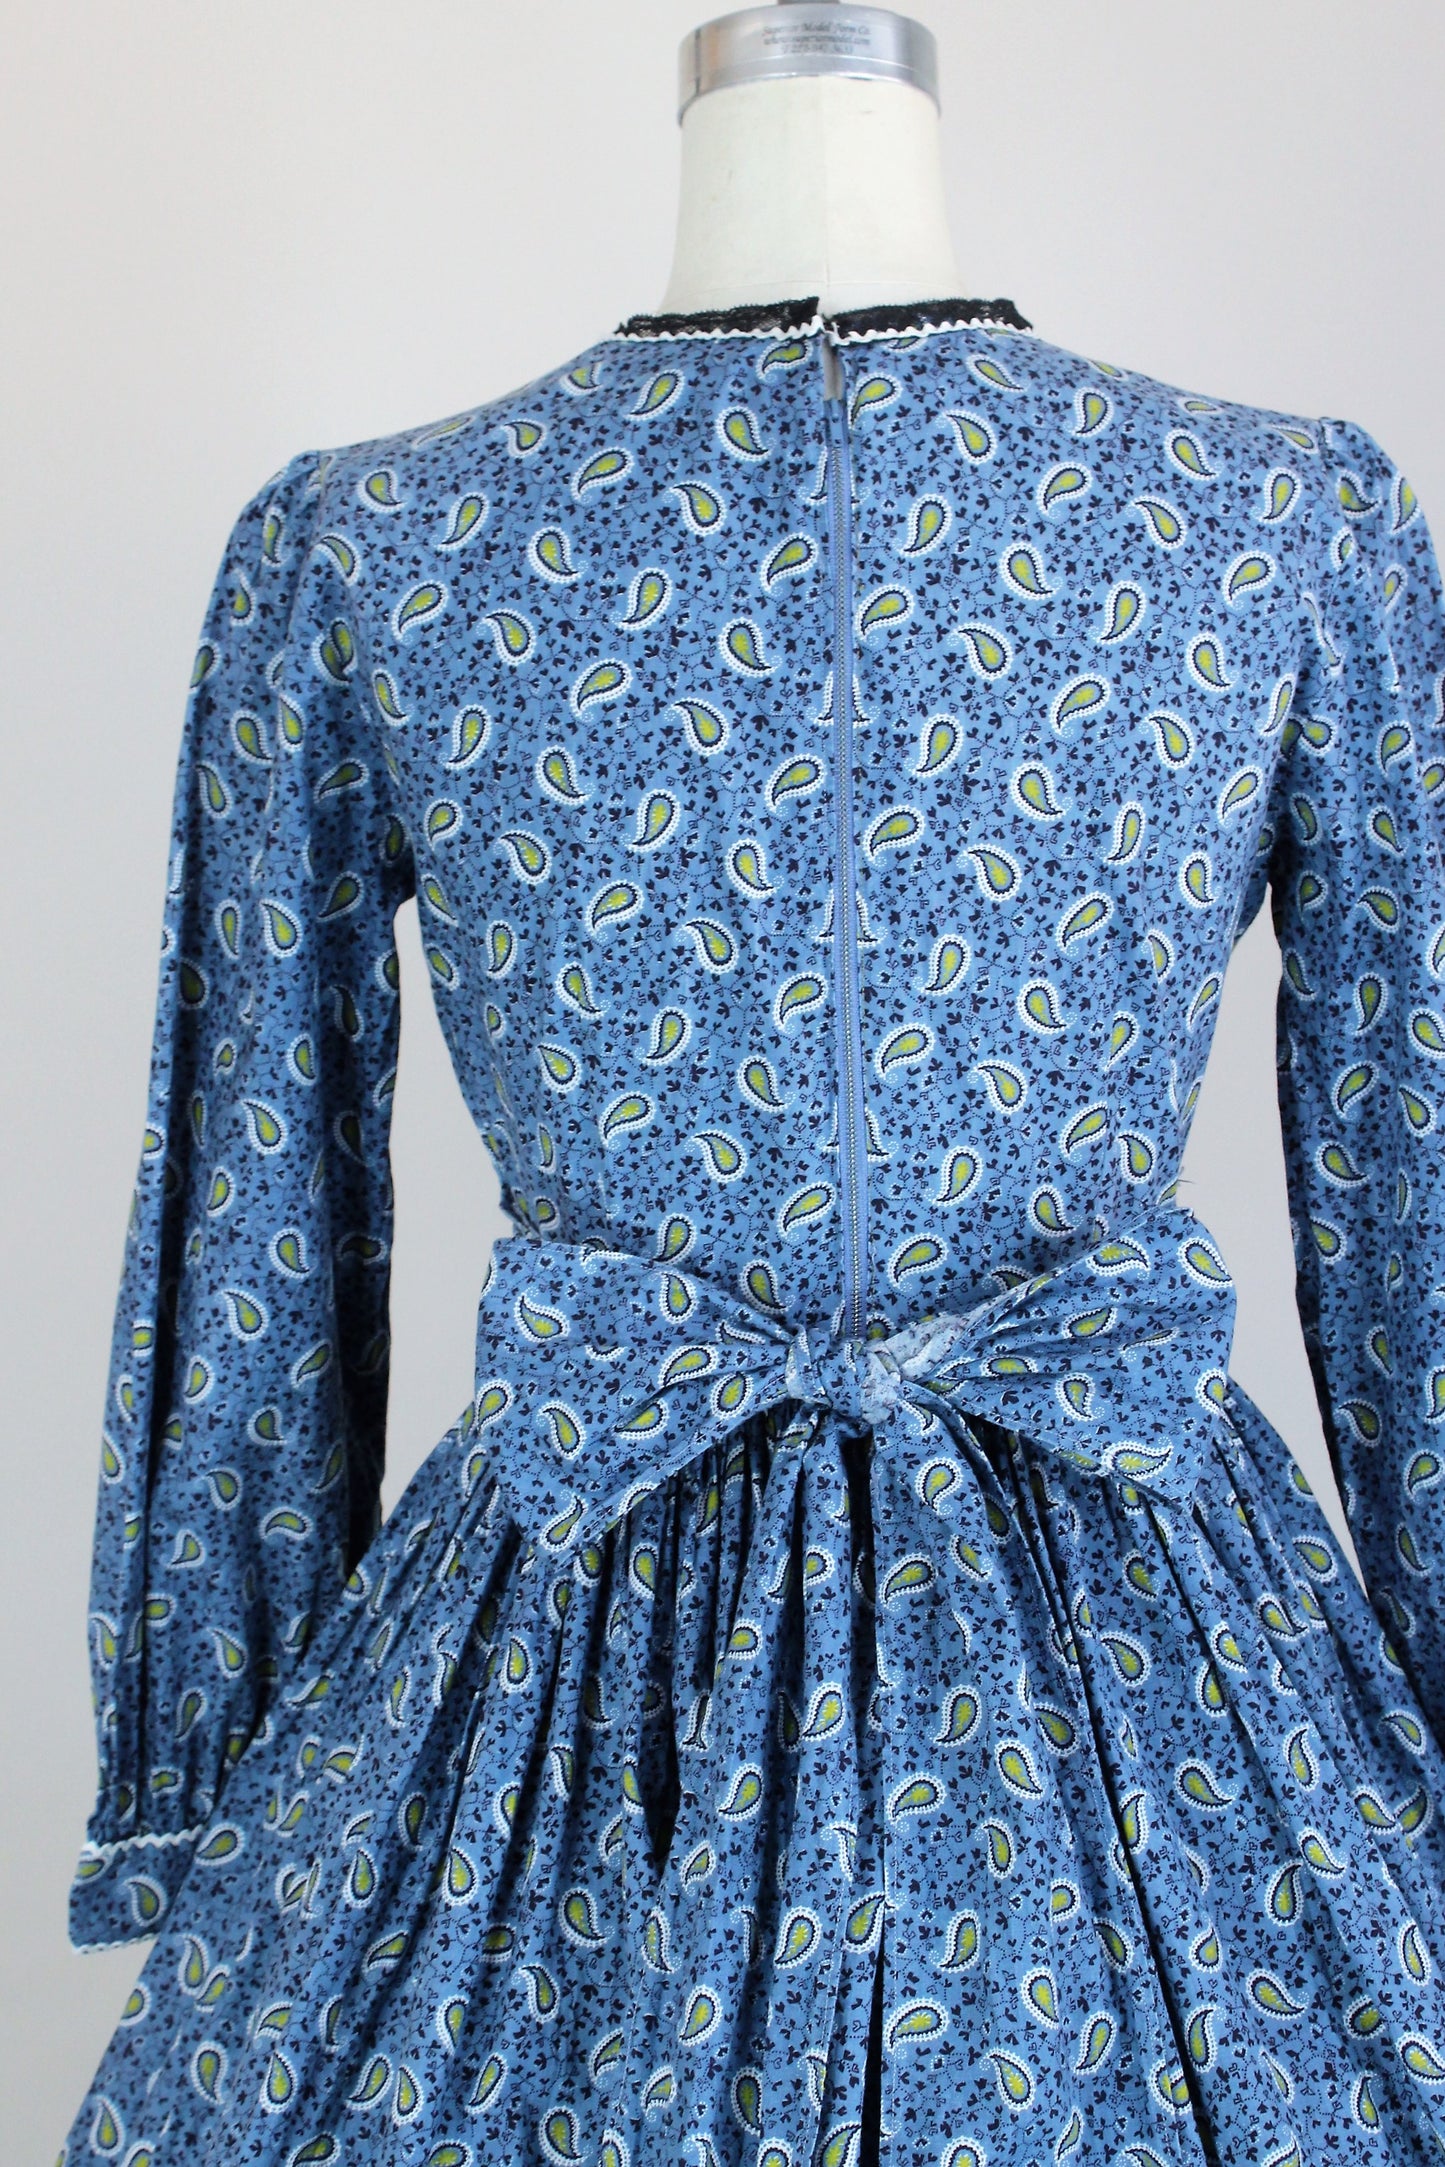 Vintage 1950s Blue Paisley Calico Cotton Fit and Flare Dress